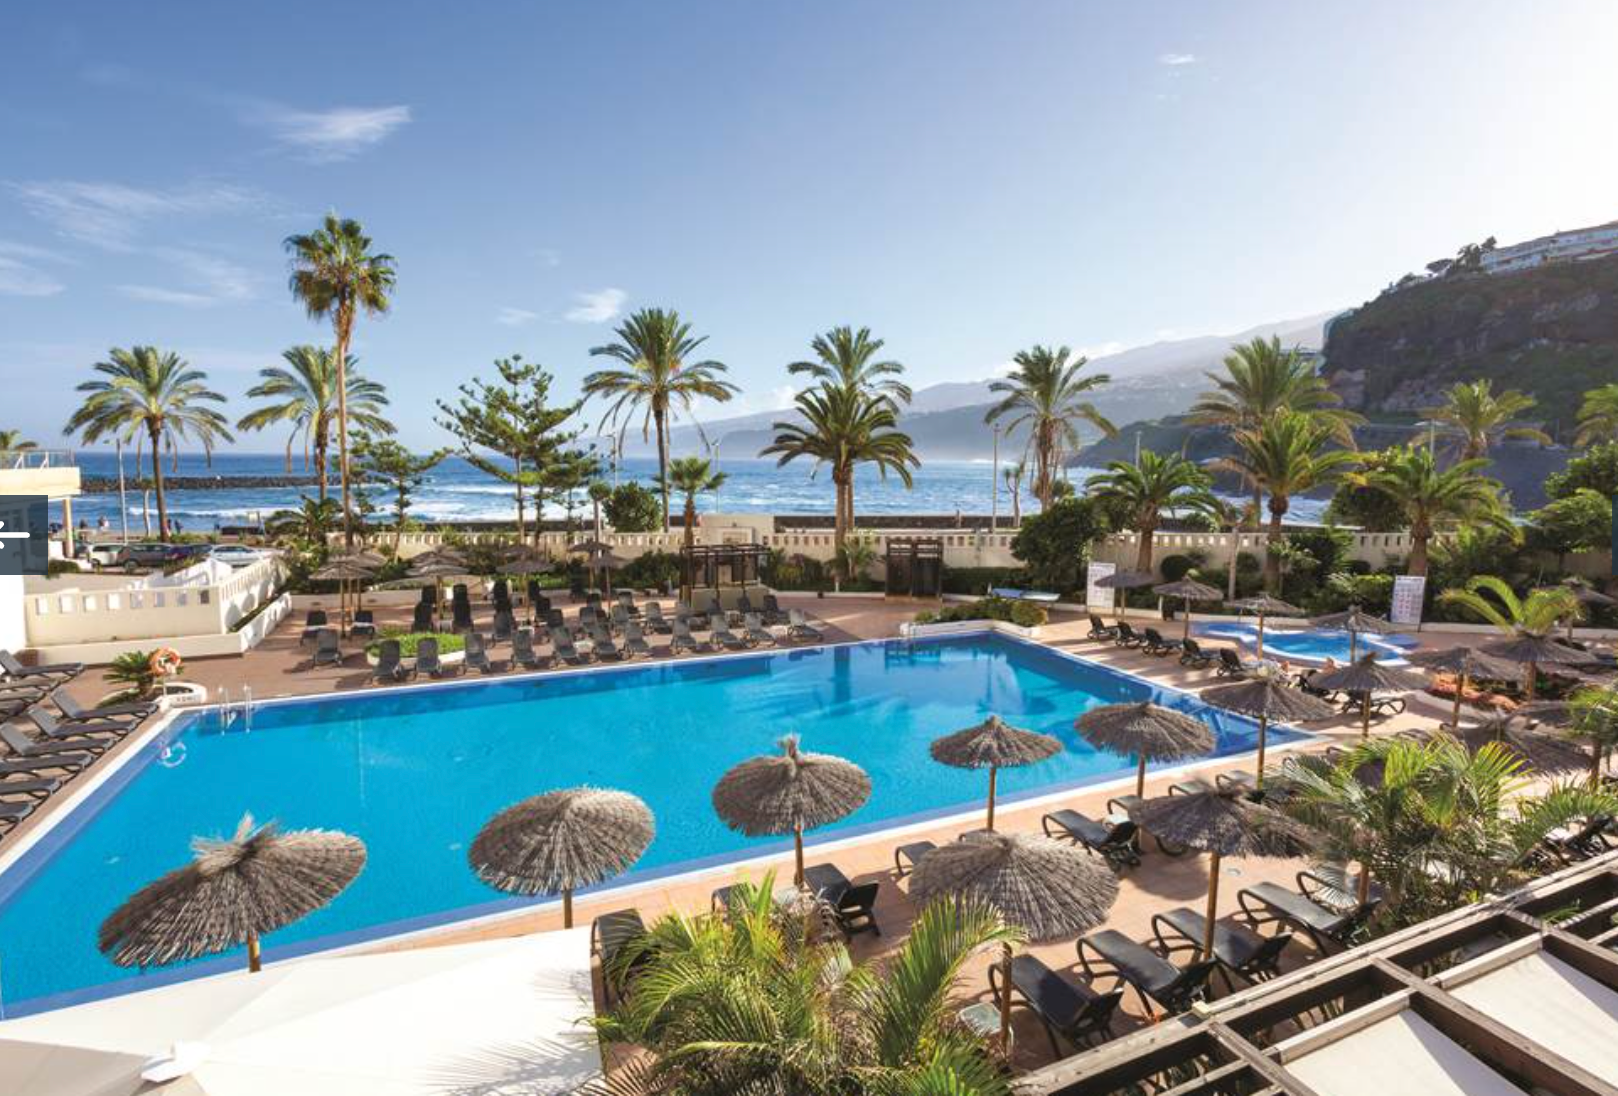 Views to break the bank: The Sol Costa Atlantis Tenerife hotel, where an all-inclusive week comes with a rather high bill